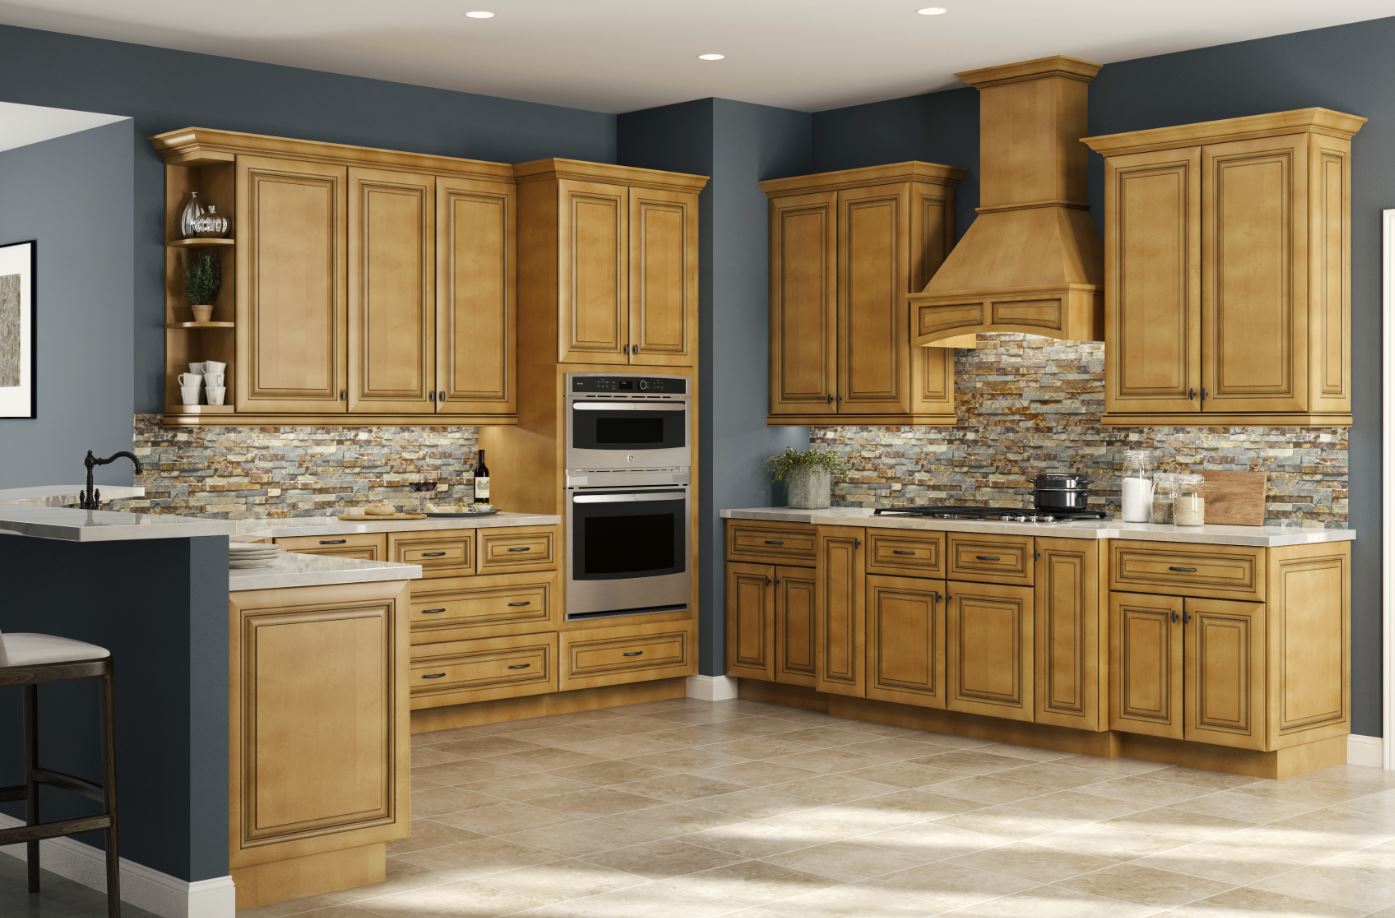 Lewiston Bath Cabinets in Toffee Glaze – Kitchen – The Home Depot